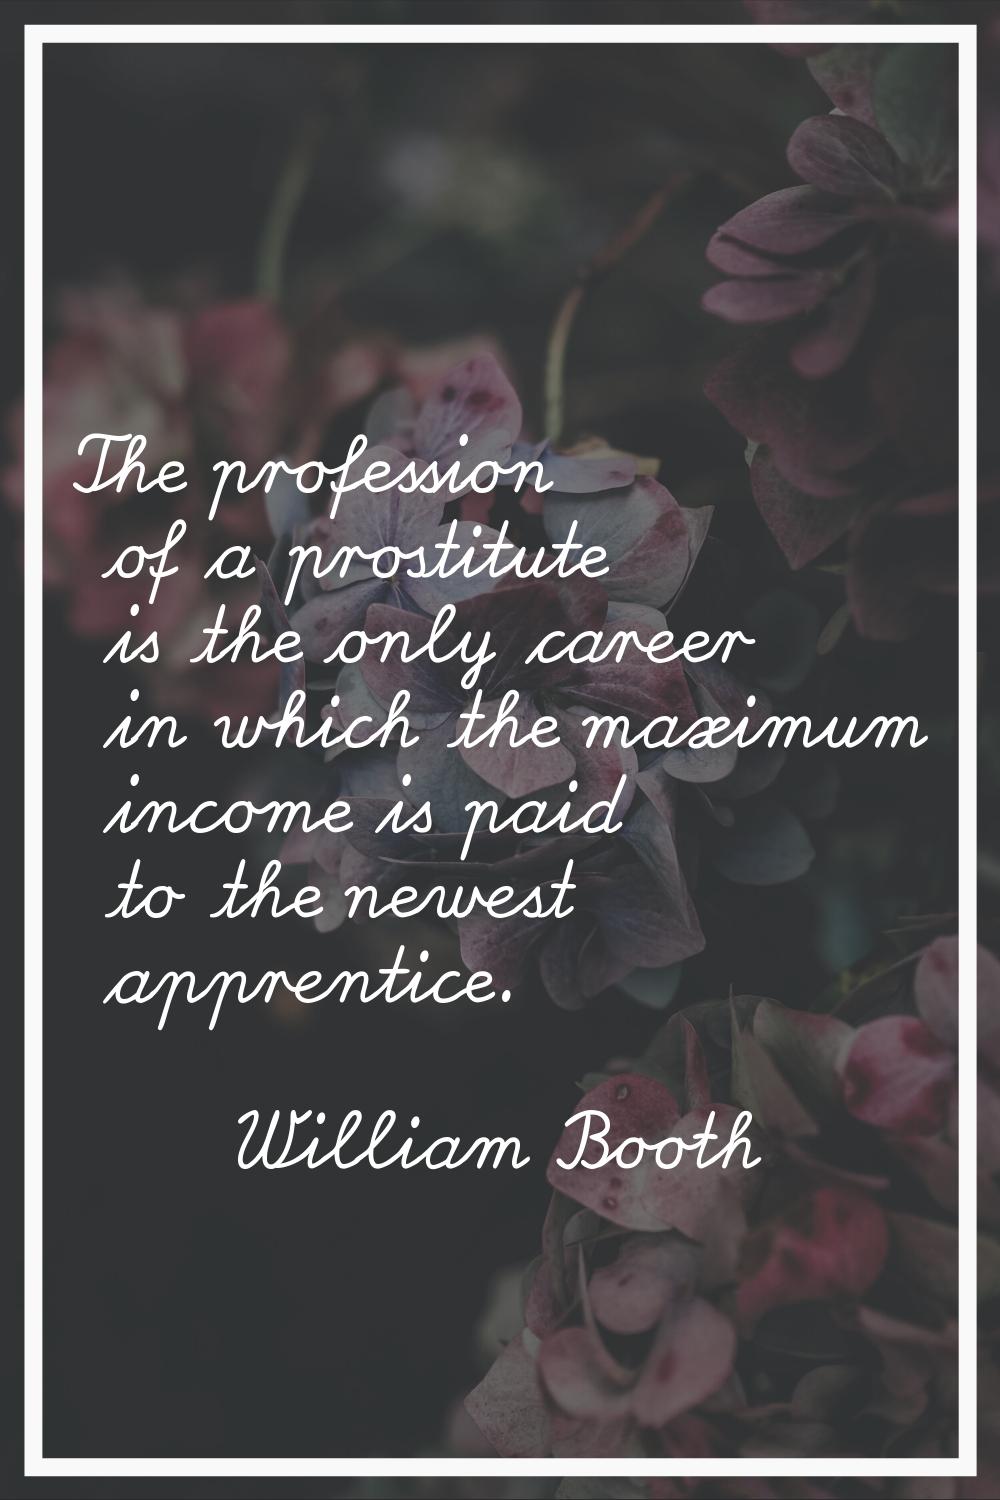 The profession of a prostitute is the only career in which the maximum income is paid to the newest